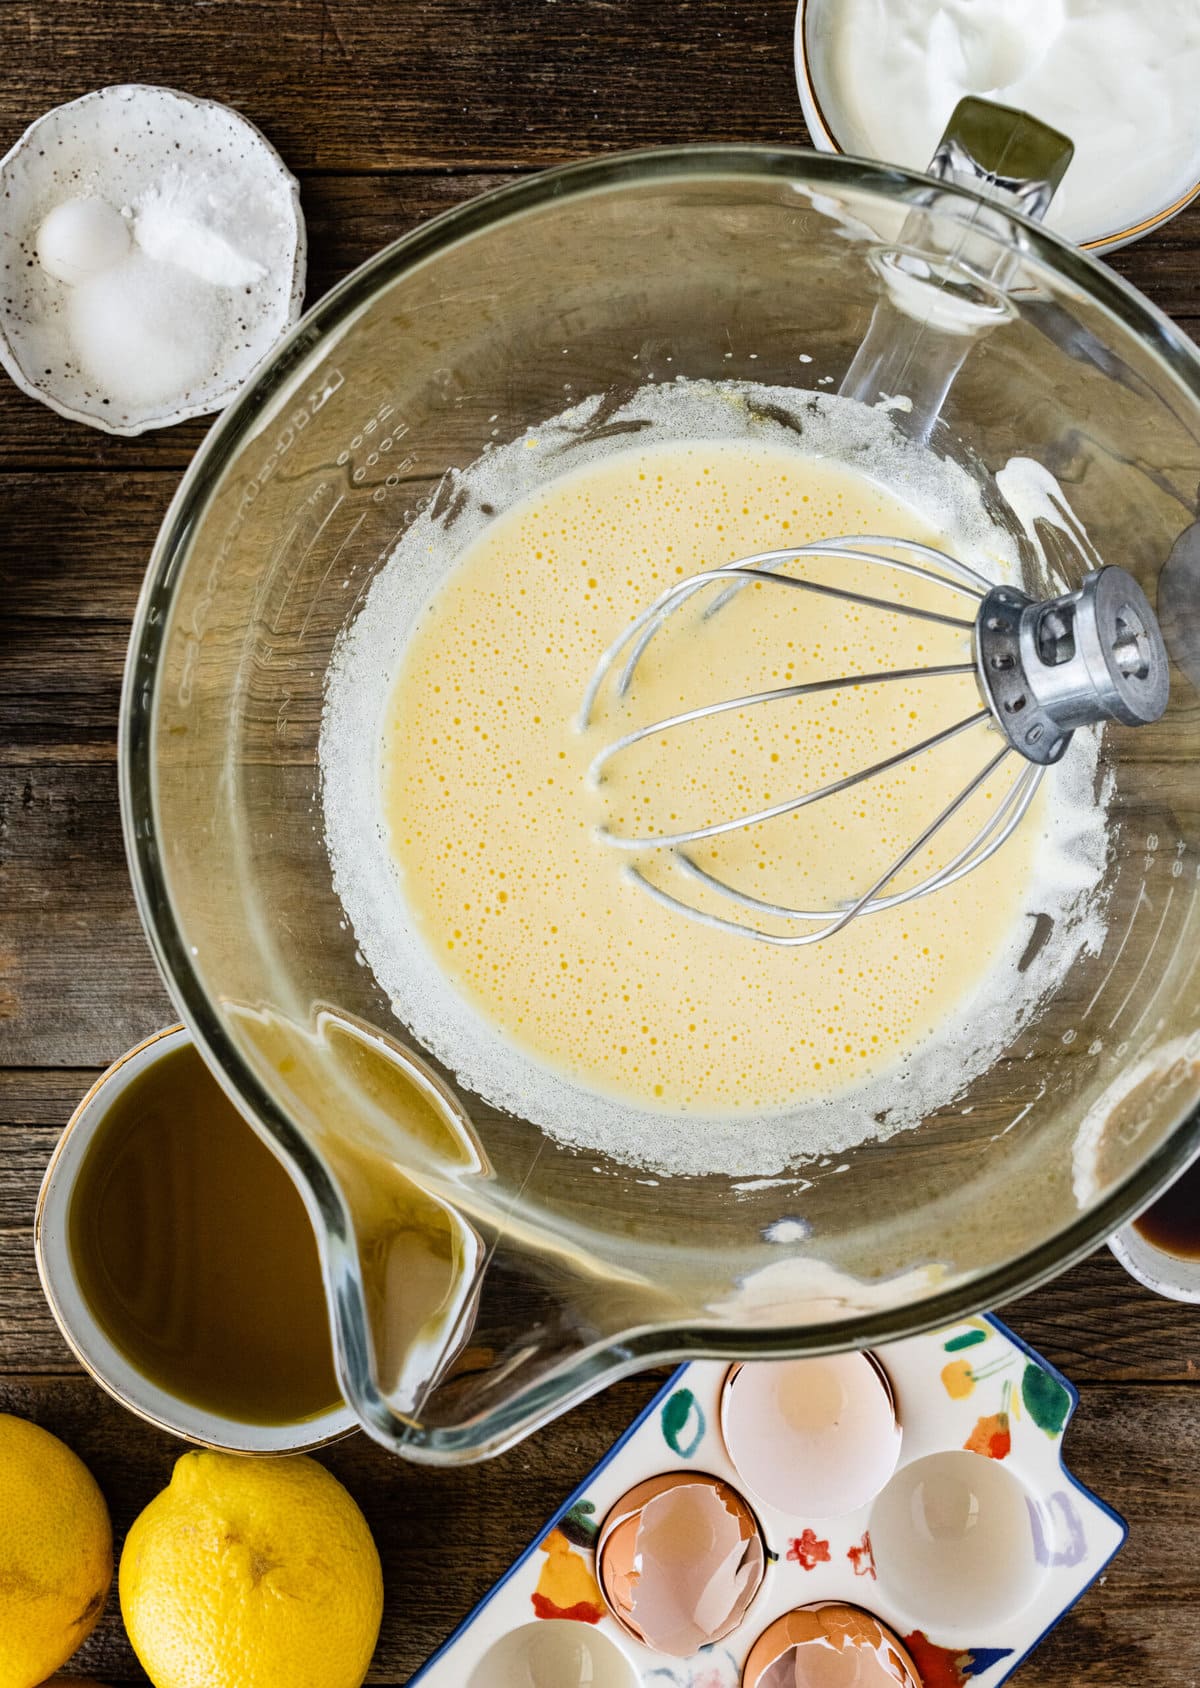 How to make olive oil cake (step-by-step) instructions- mixing eggs and sugar with whisk.